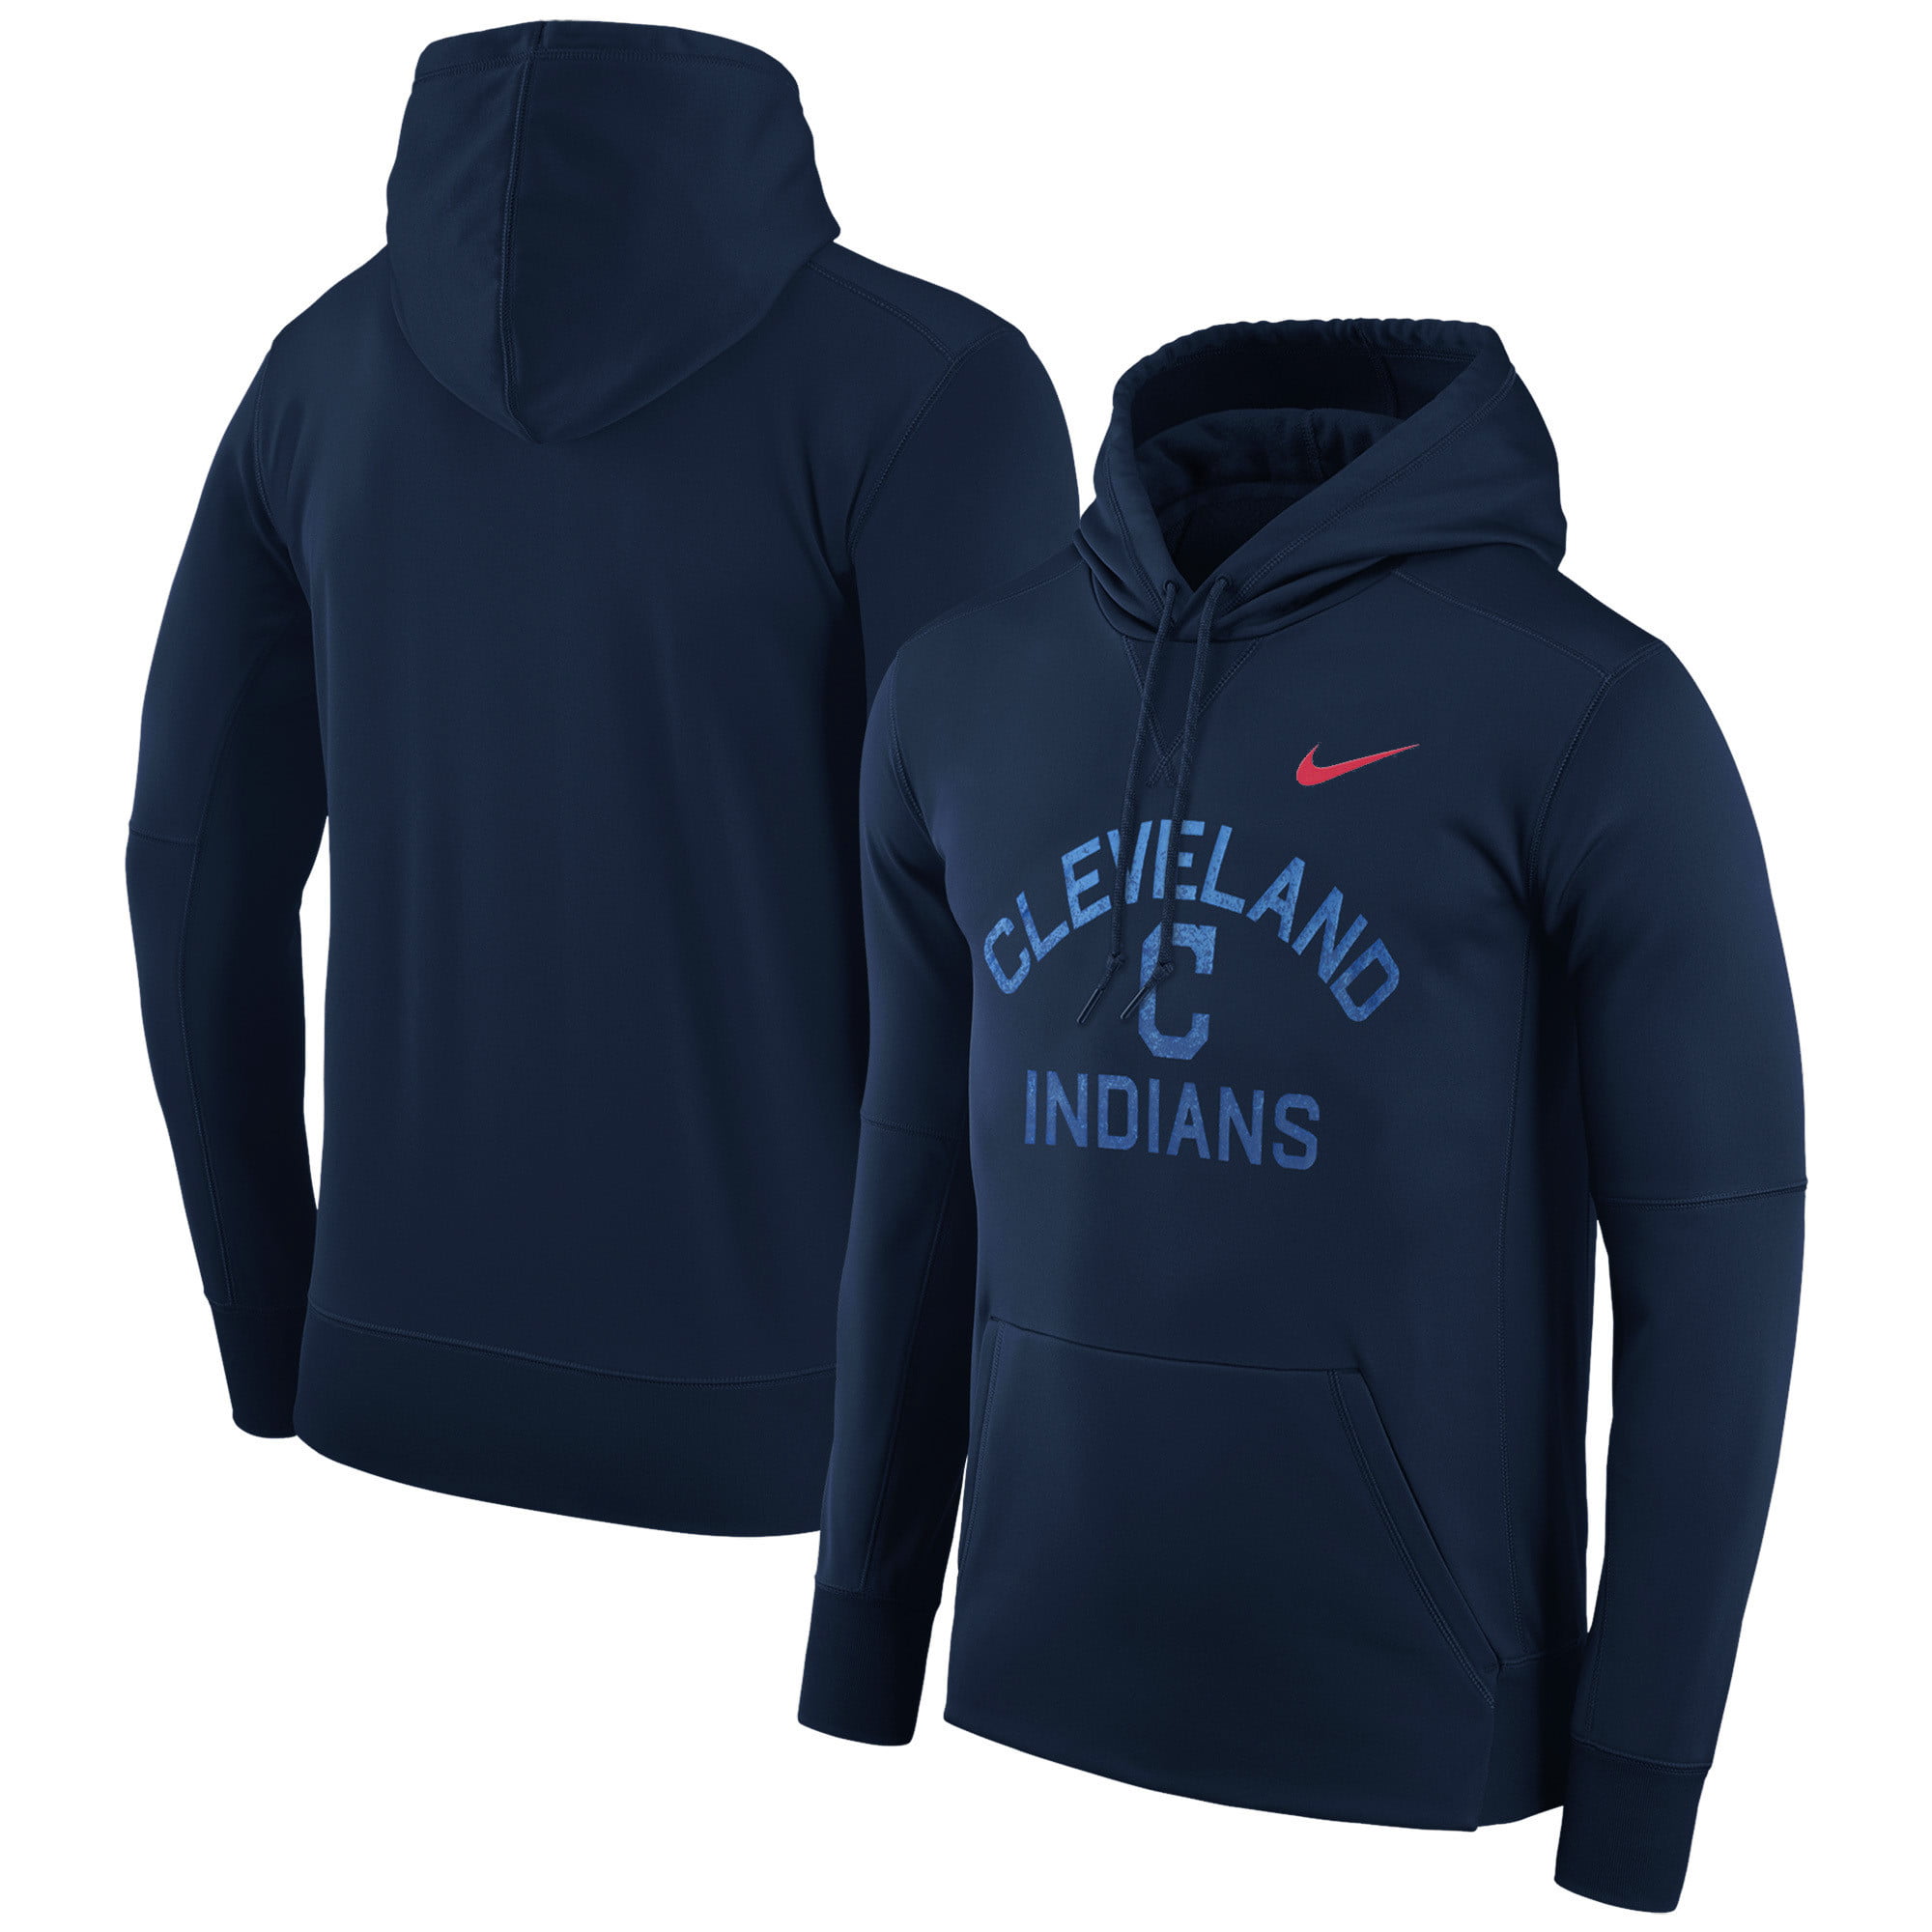 Cleveland Indians Nike Therma Pullover Hoodie - Navy - Walmart.com ...